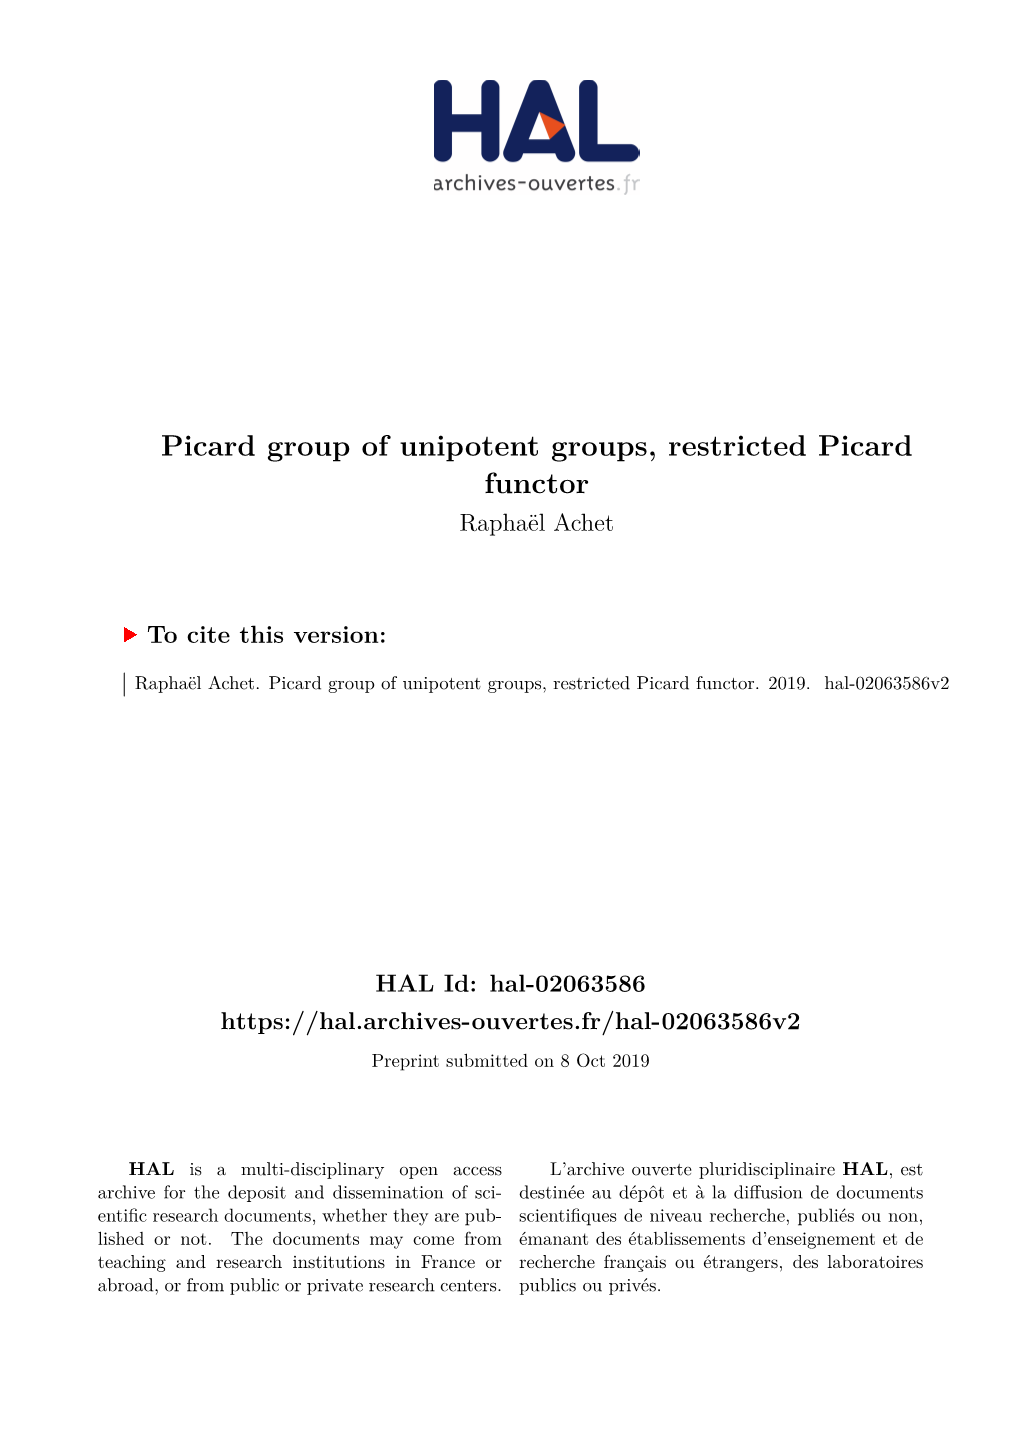 Picard Group of Unipotent Groups, Restricted Picard Functor Raphaël Achet